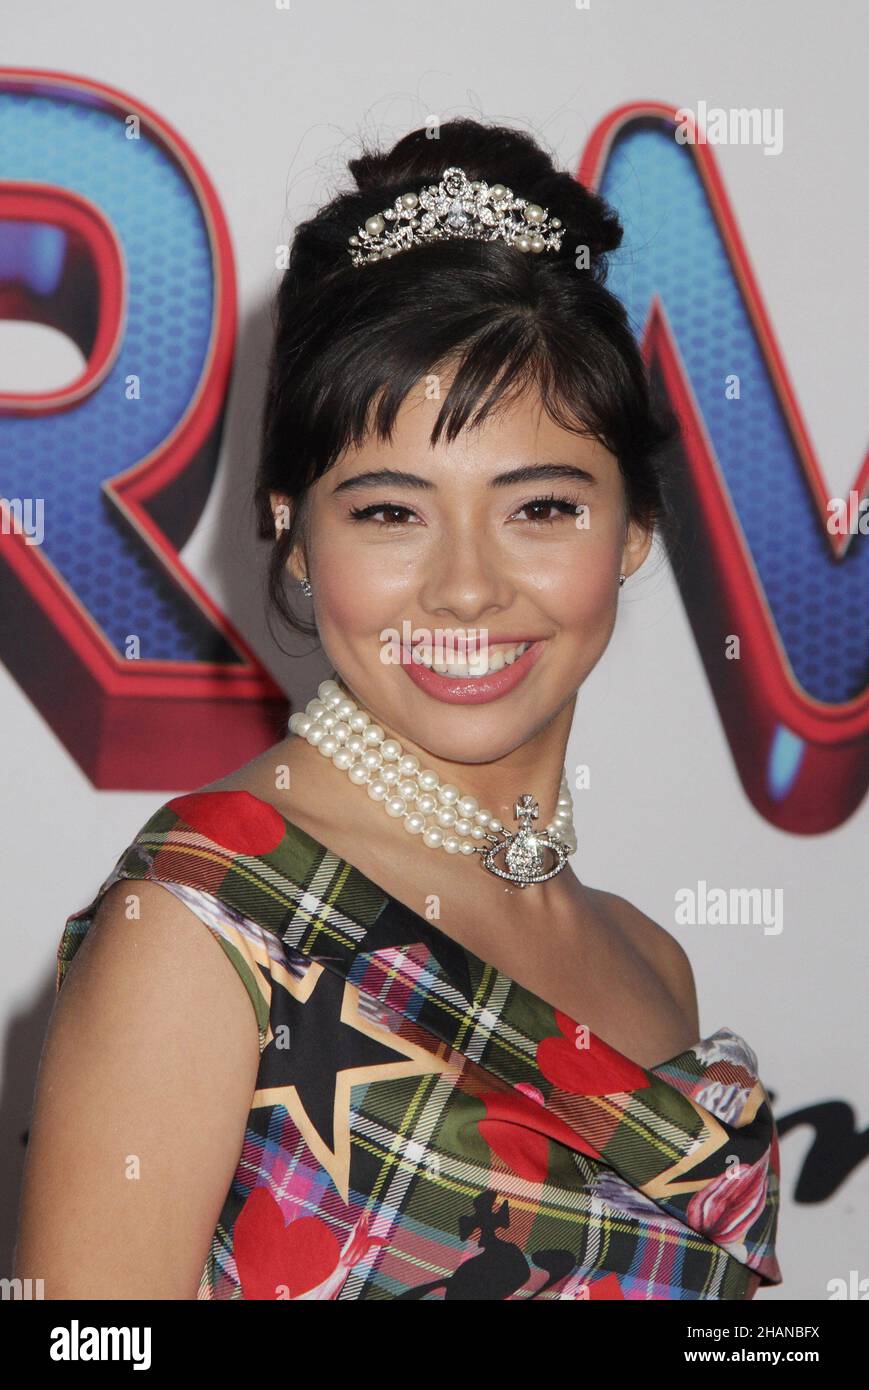 Xochitl Gomez 12/13/2021 The Los Angeles Premiere of 'Spider-Man: No Way Home' held at Regency Village Theatre in Los Angeles, CA Photo by Kazuki Hirata/HollywoodNewsWire.co Credit: Hollywood News Wire Inc./Alamy Live News Stock Photo